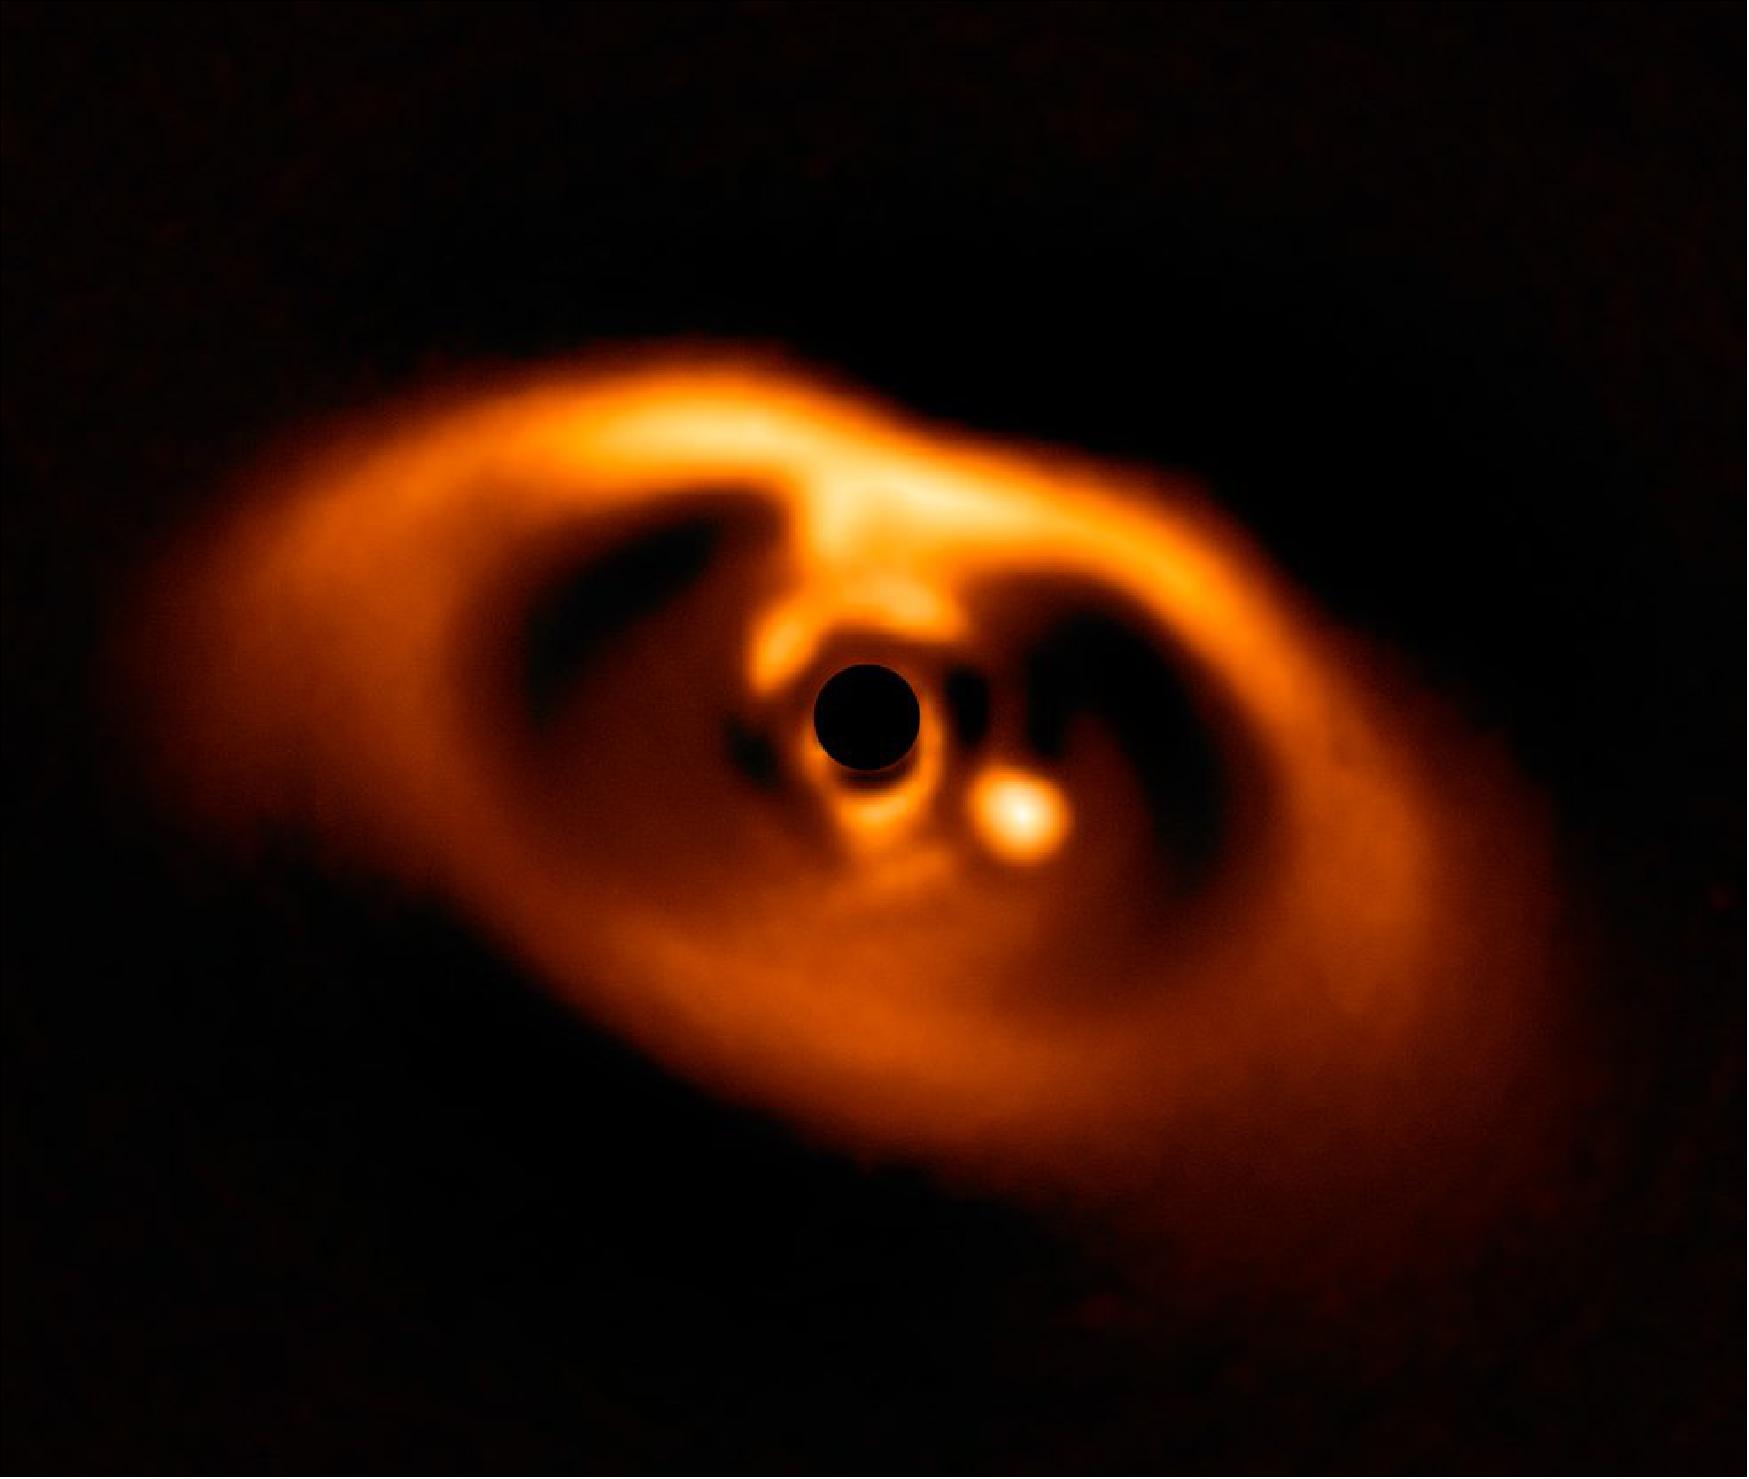 Figure 91: ESO's (European Southern Observatory’s) VLT (Very Large Telescope) caught the first clear image of a forming planet, PDS 70b, around a dwarf star in 2018. The planet stands out as a bright point to the right of the center of the image, which is blacked out by the coronagraph mask used to block the light of the central star [image credits: ESO, VLT, André B. Müller (ESO)]